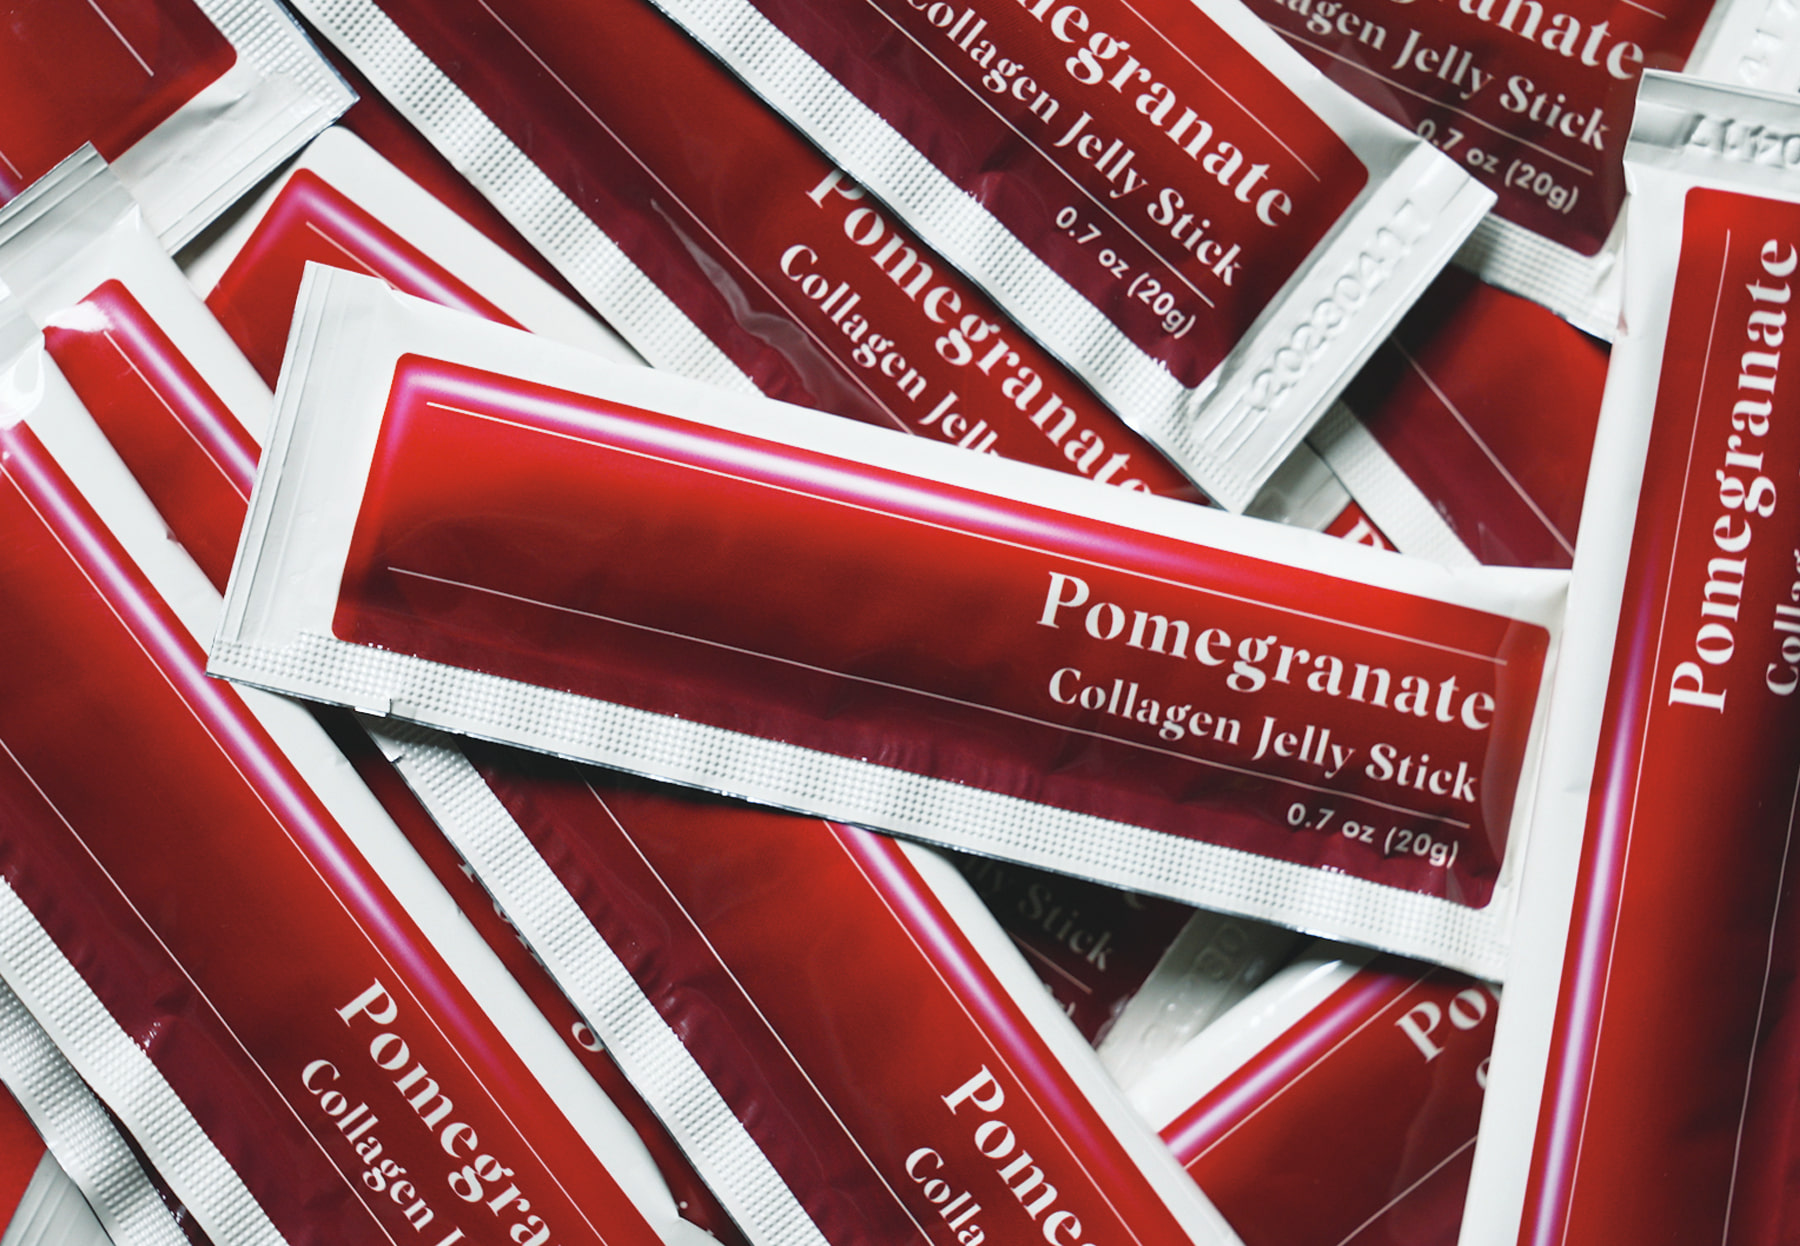 The perfect mix of Pomegranate and Marine Collagen Peptide!